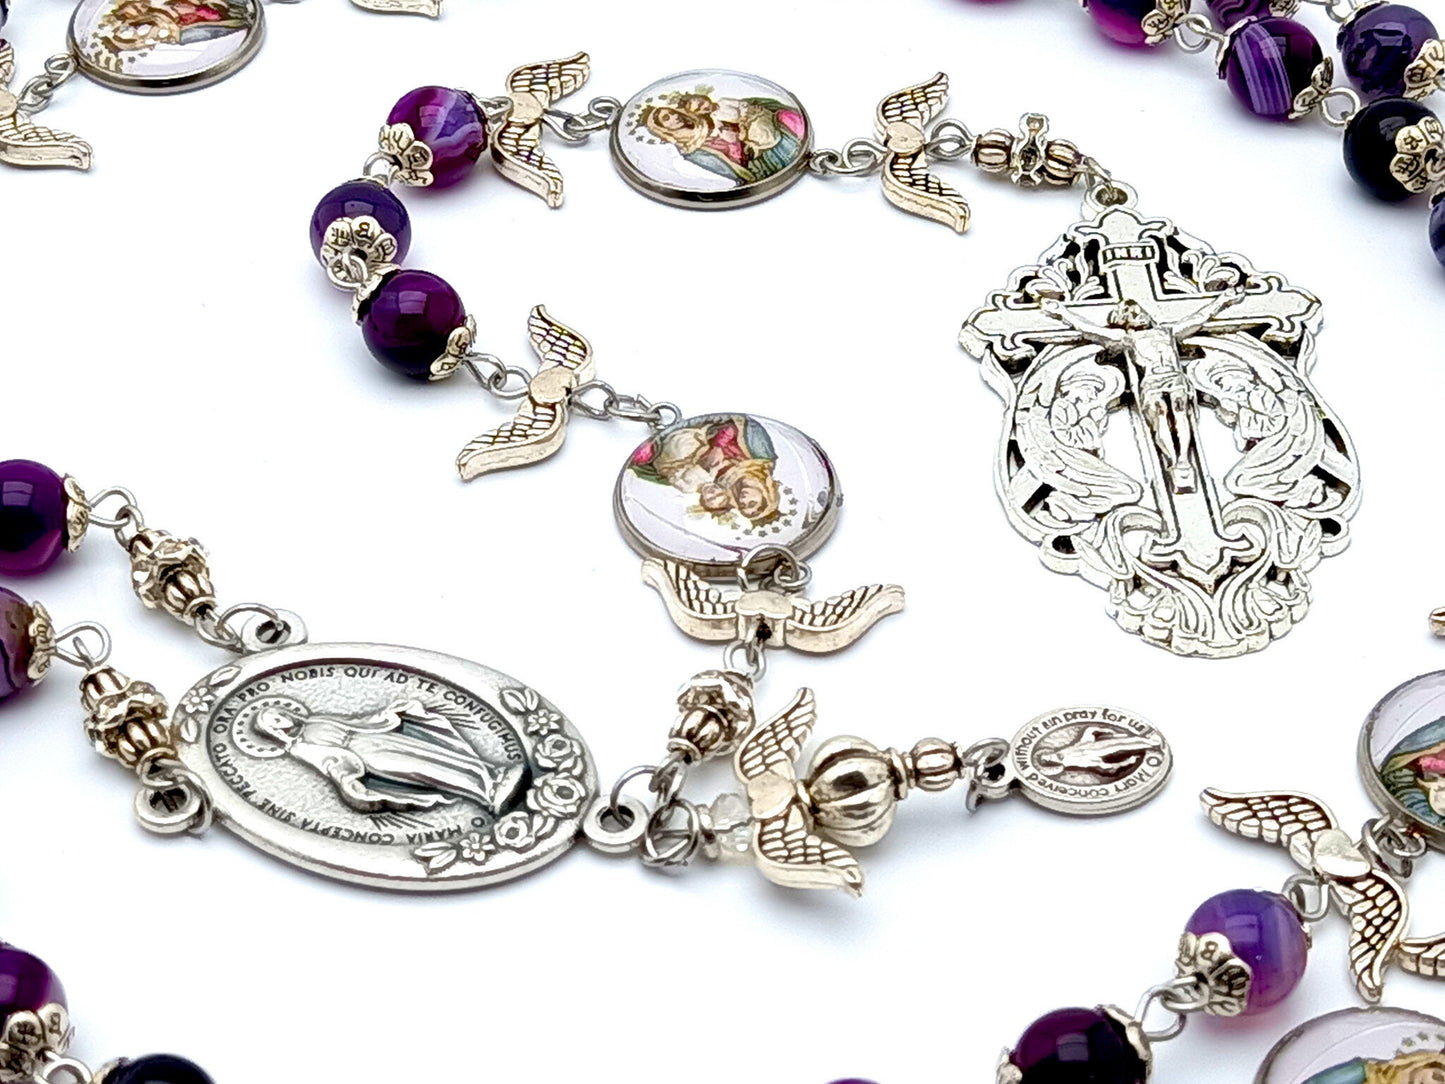 Our Lady of Mount Carmel unique rosary beads with purple agate gemstone and silver winged dove  beads, silver Holy Angels crucifix and centre medal.